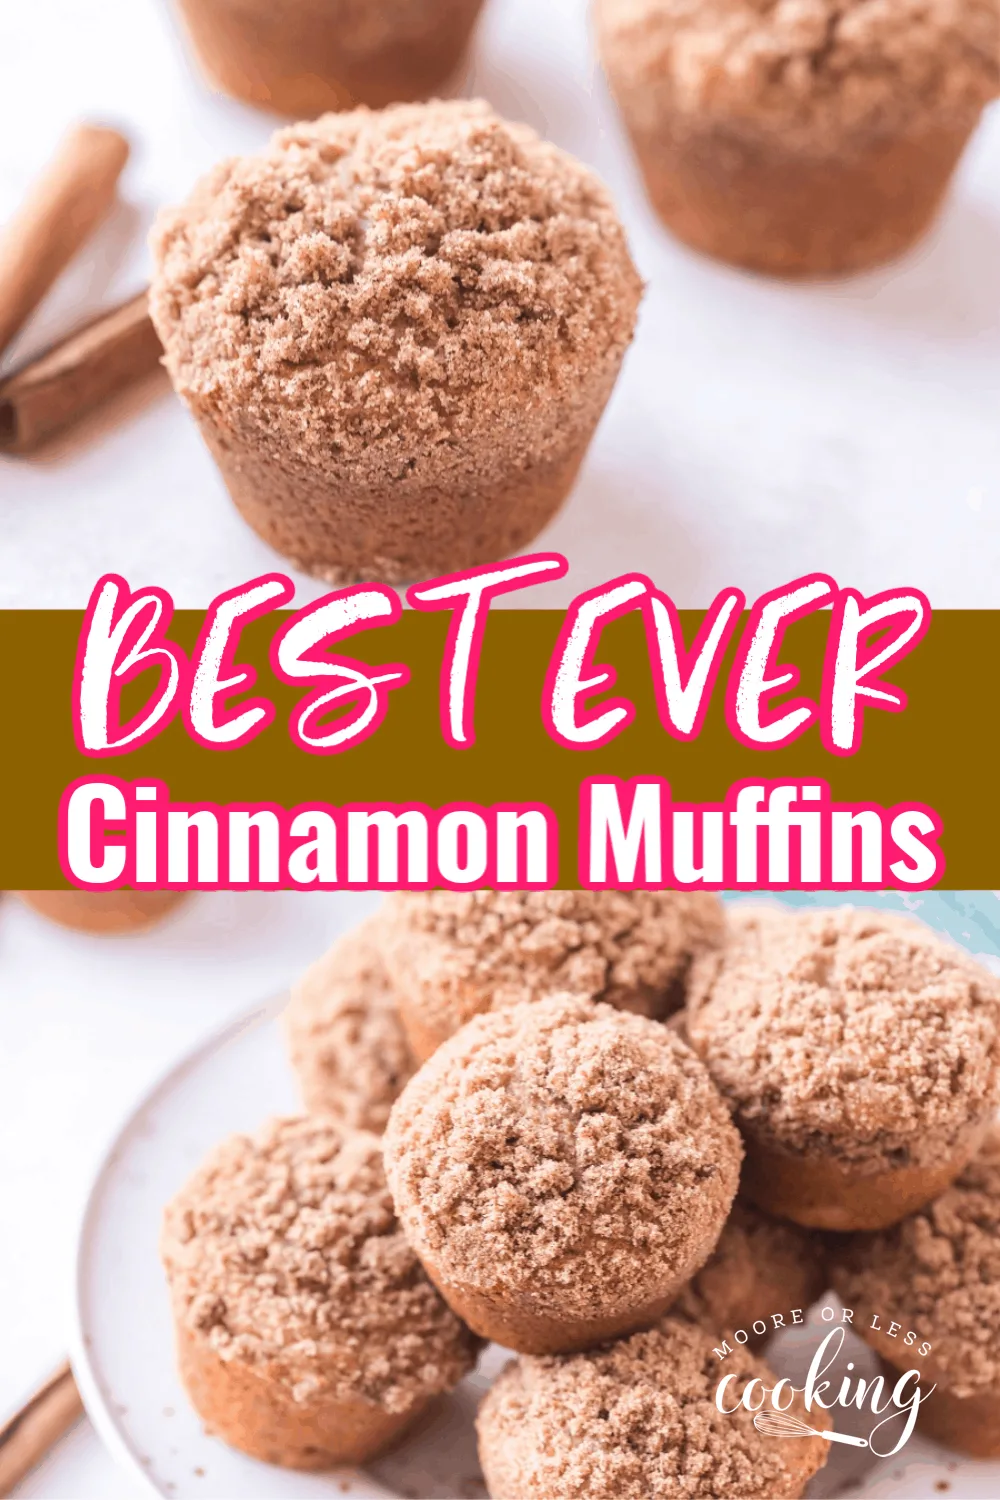 Best Cinnamon Muffins Ever! These Best Ever Cinnamon Muffins have a cinnamon sugar streusel topping. These fluffy moist muffins are so quick to make!  Recipe makes 12 muffins so share them with your friends and family! via @Mooreorlesscook